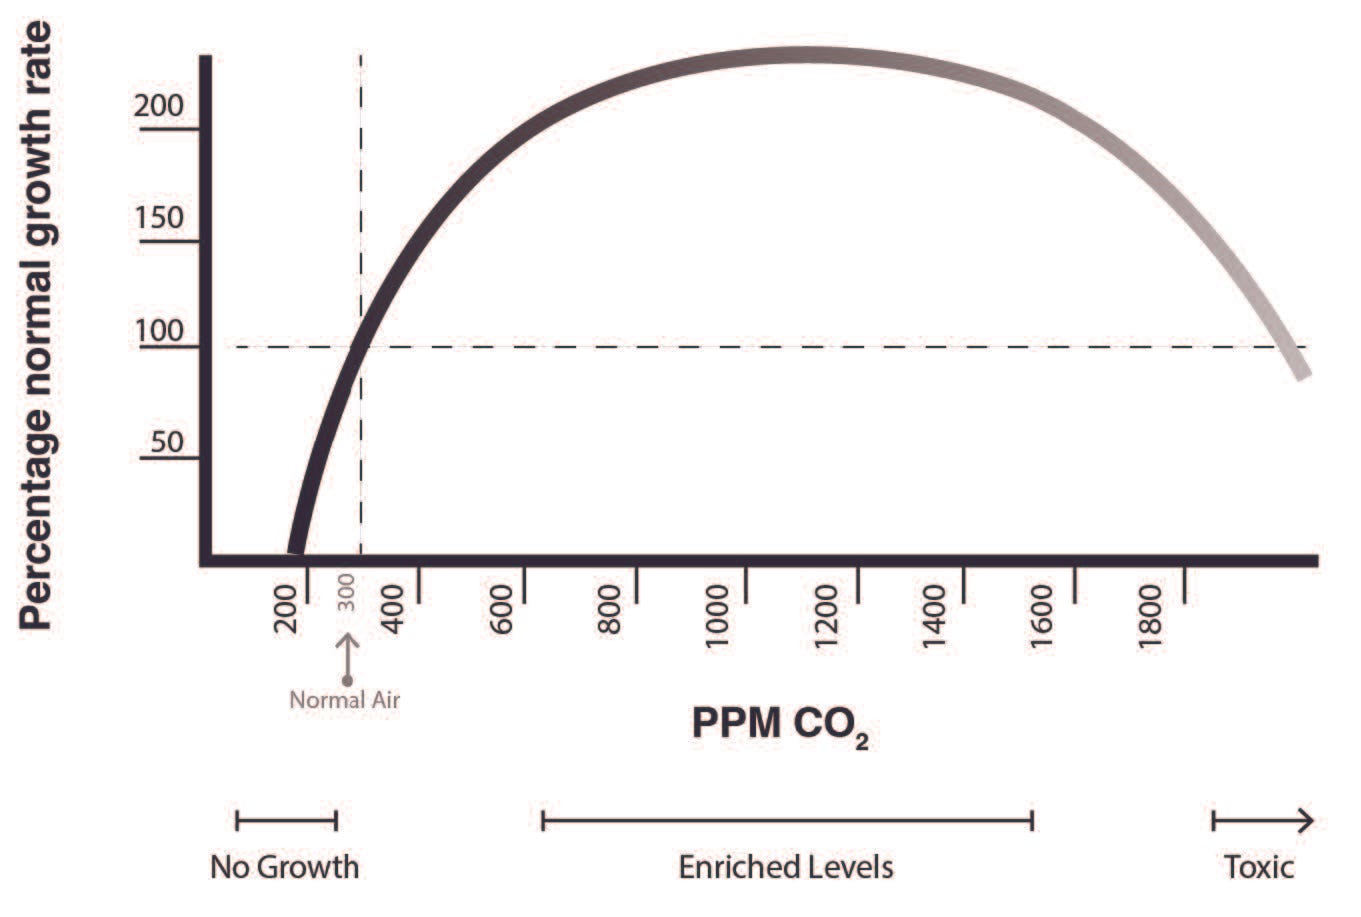 Relation between CO2 concentration and rate of plant growth.